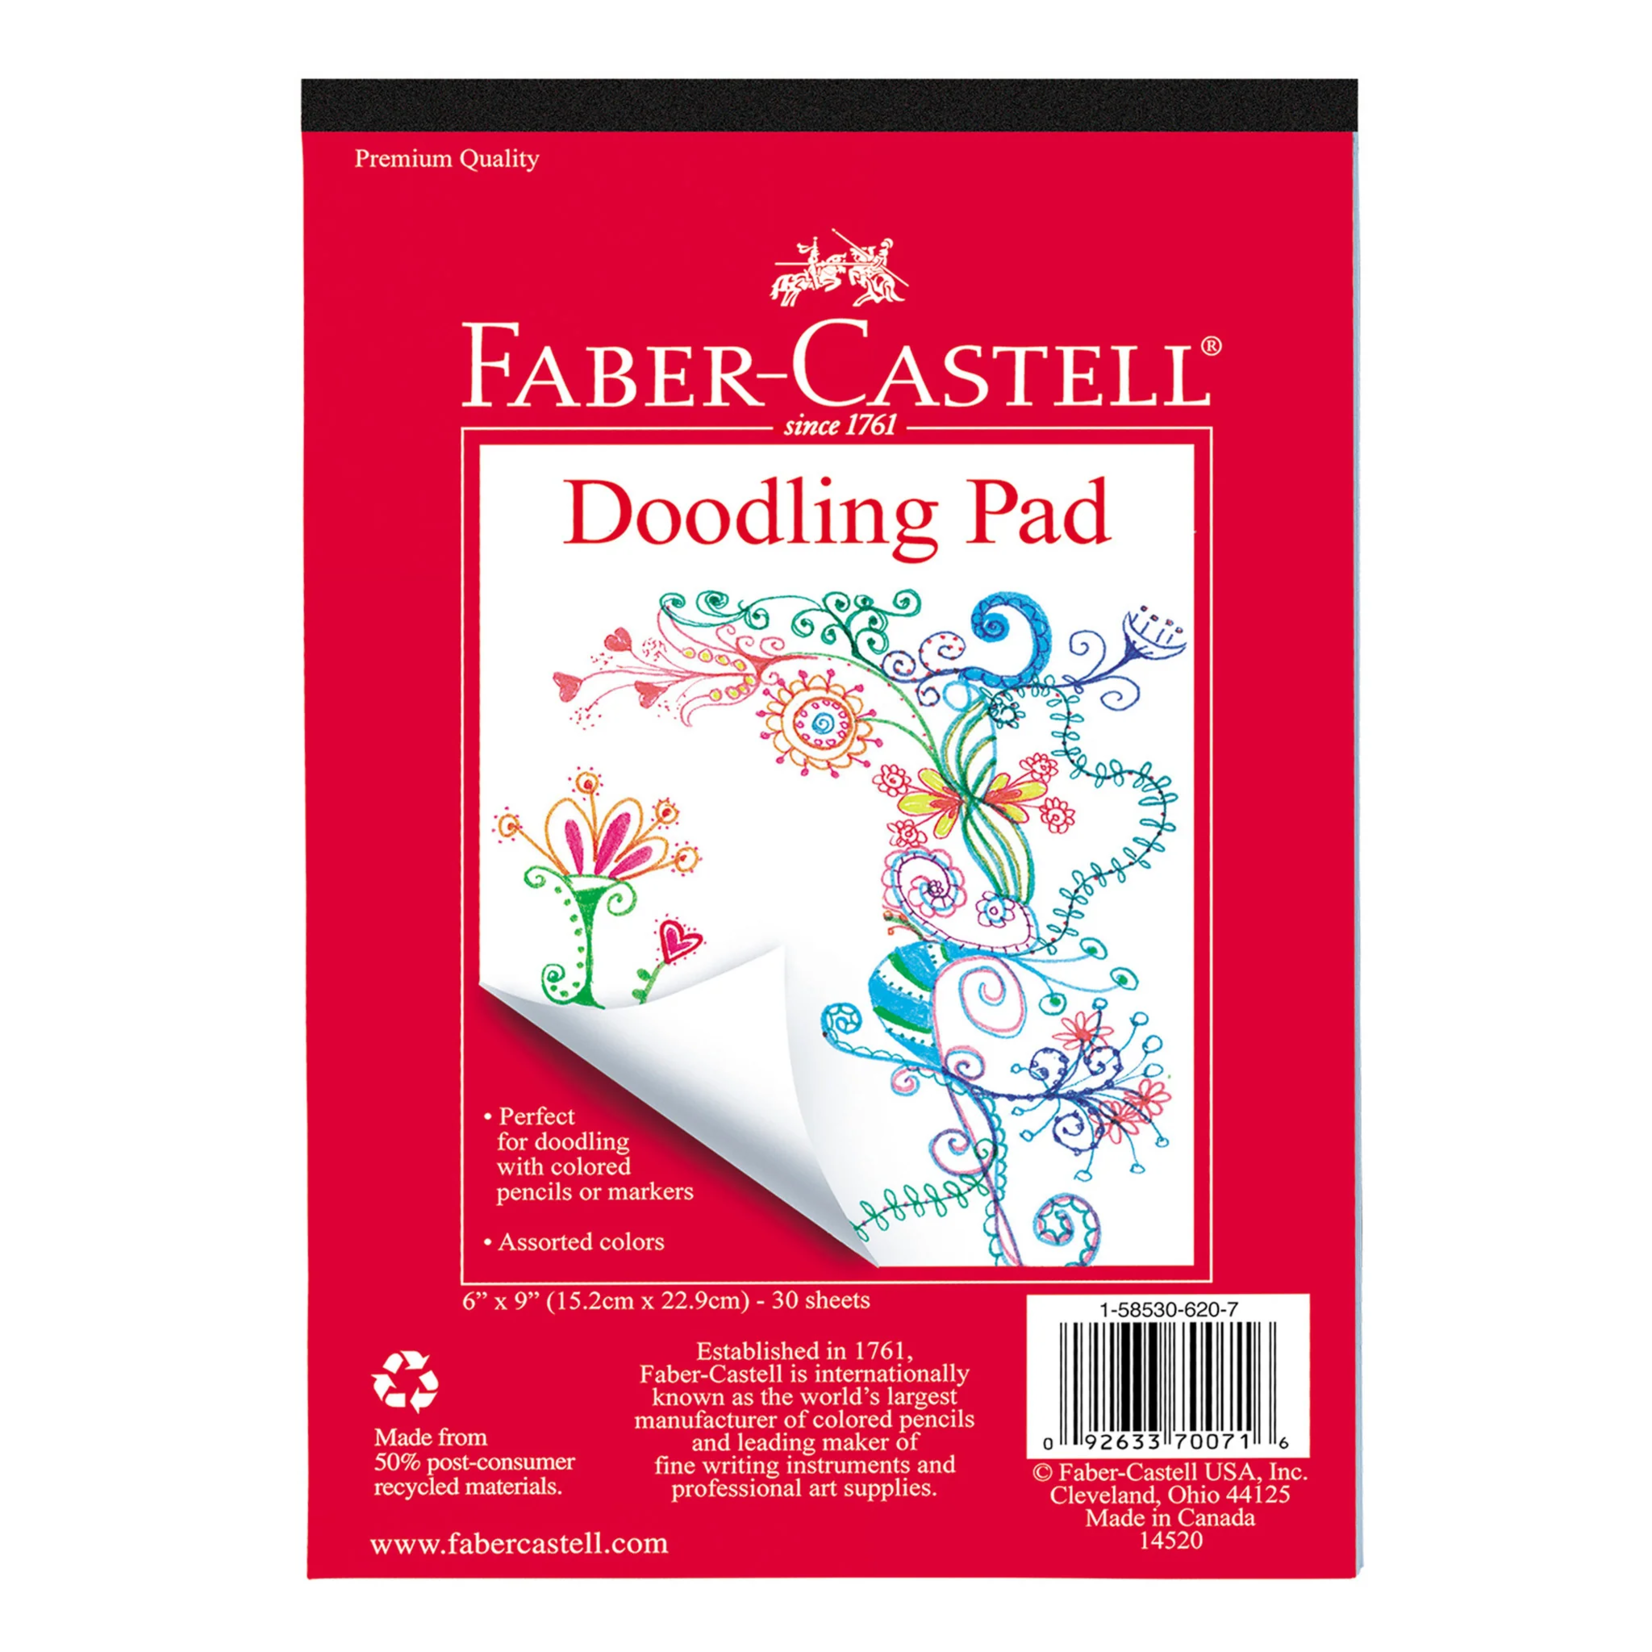 Faber-Castell Doodling Pad 6" x 9